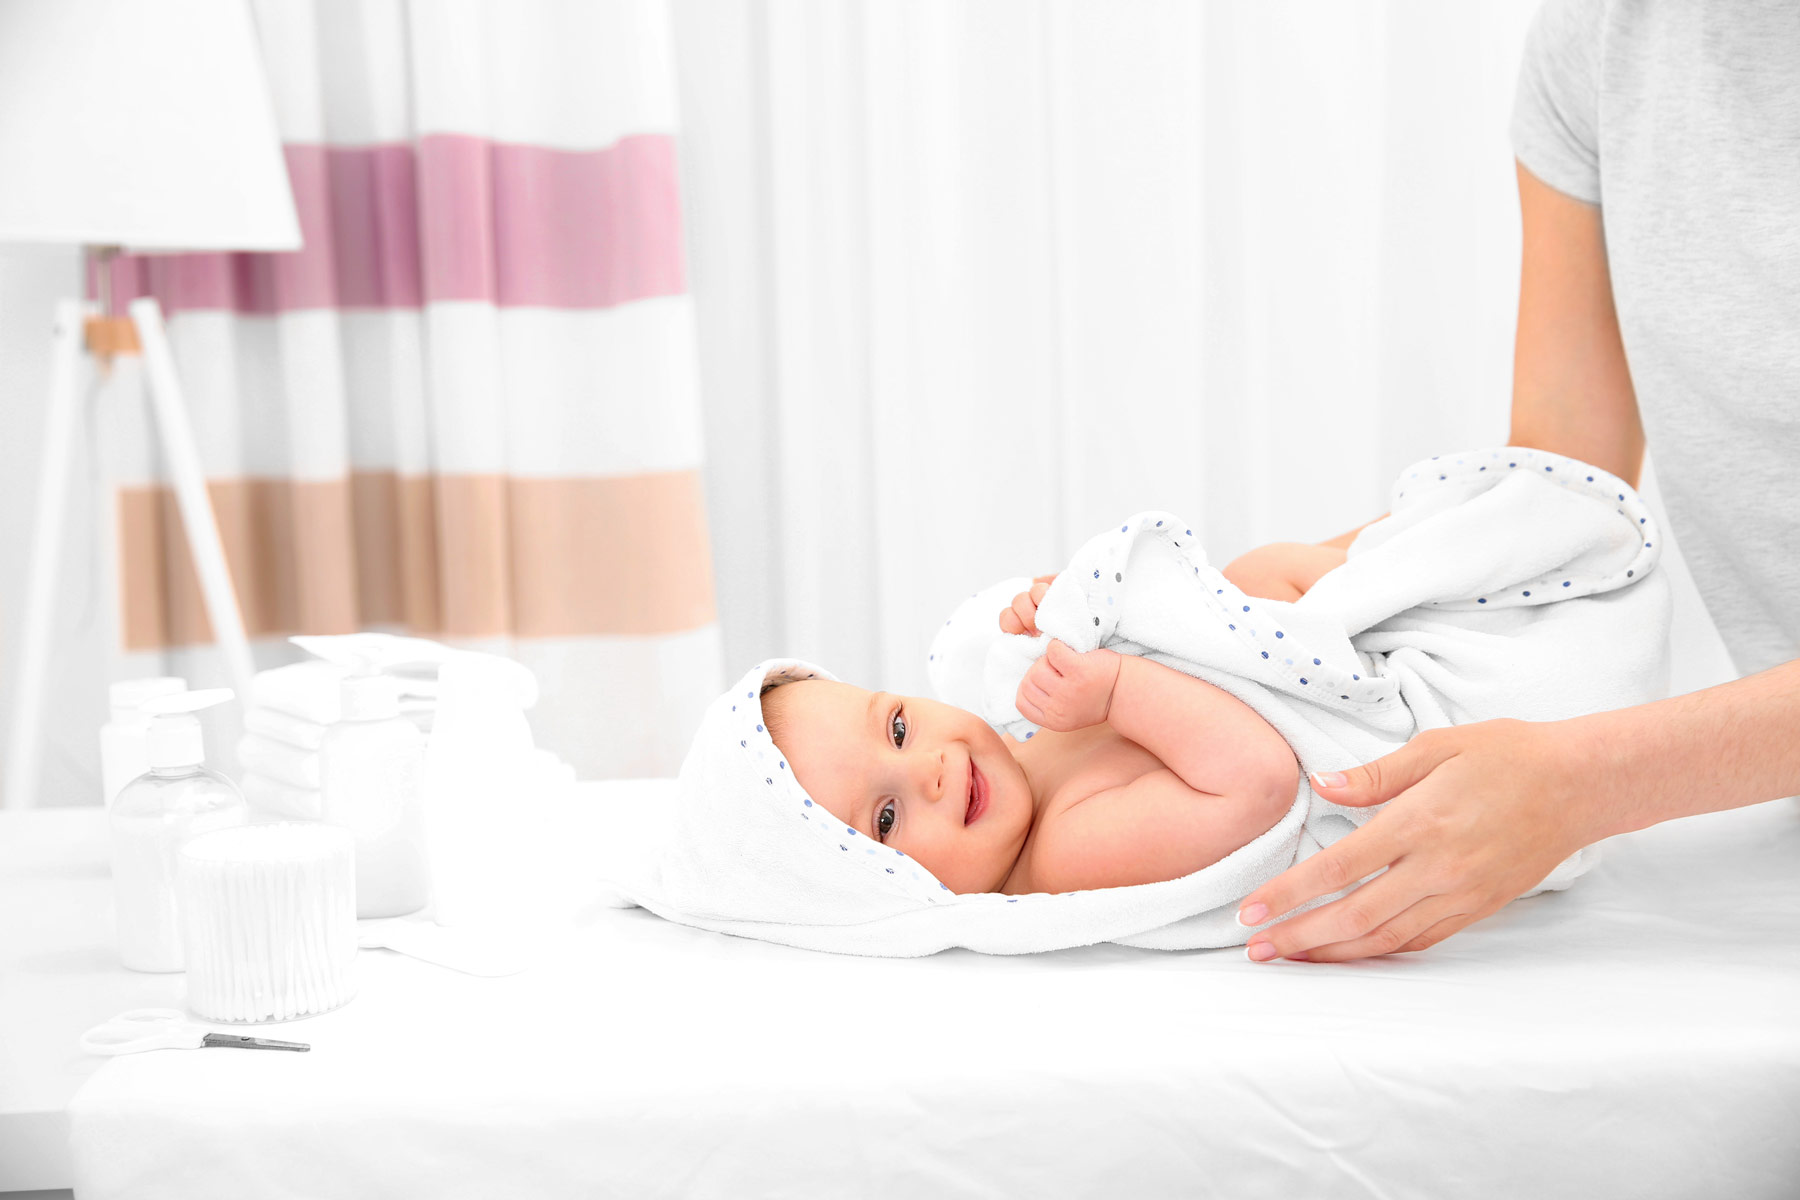 A content baby wrapped in a soft, white blanket with polka dots, smiling and gazing upwards, being gently cradled by a caregiver's hands on a changing table, surrounded by baby care products.